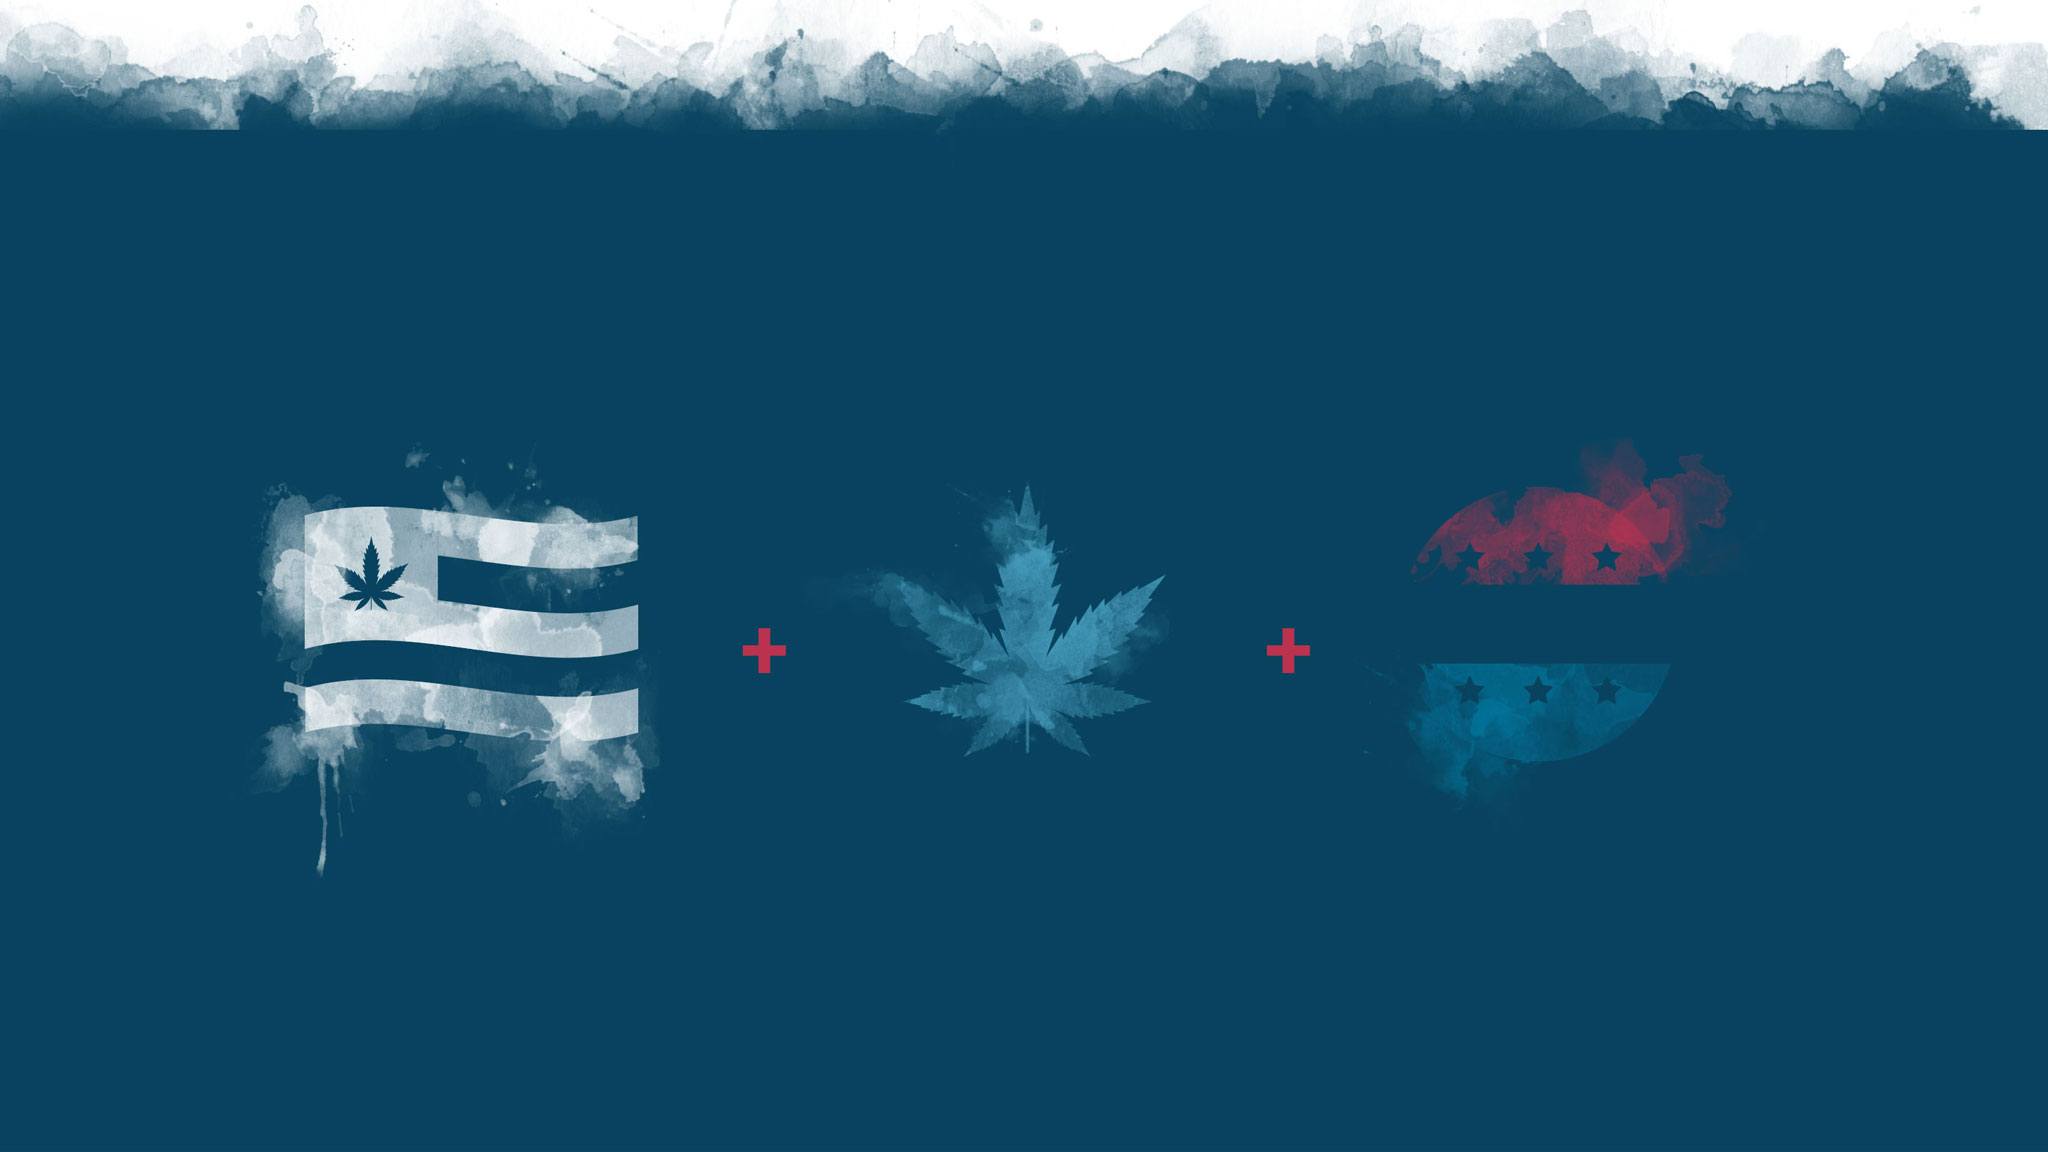 The three elements of the Capital Cannabis logo design